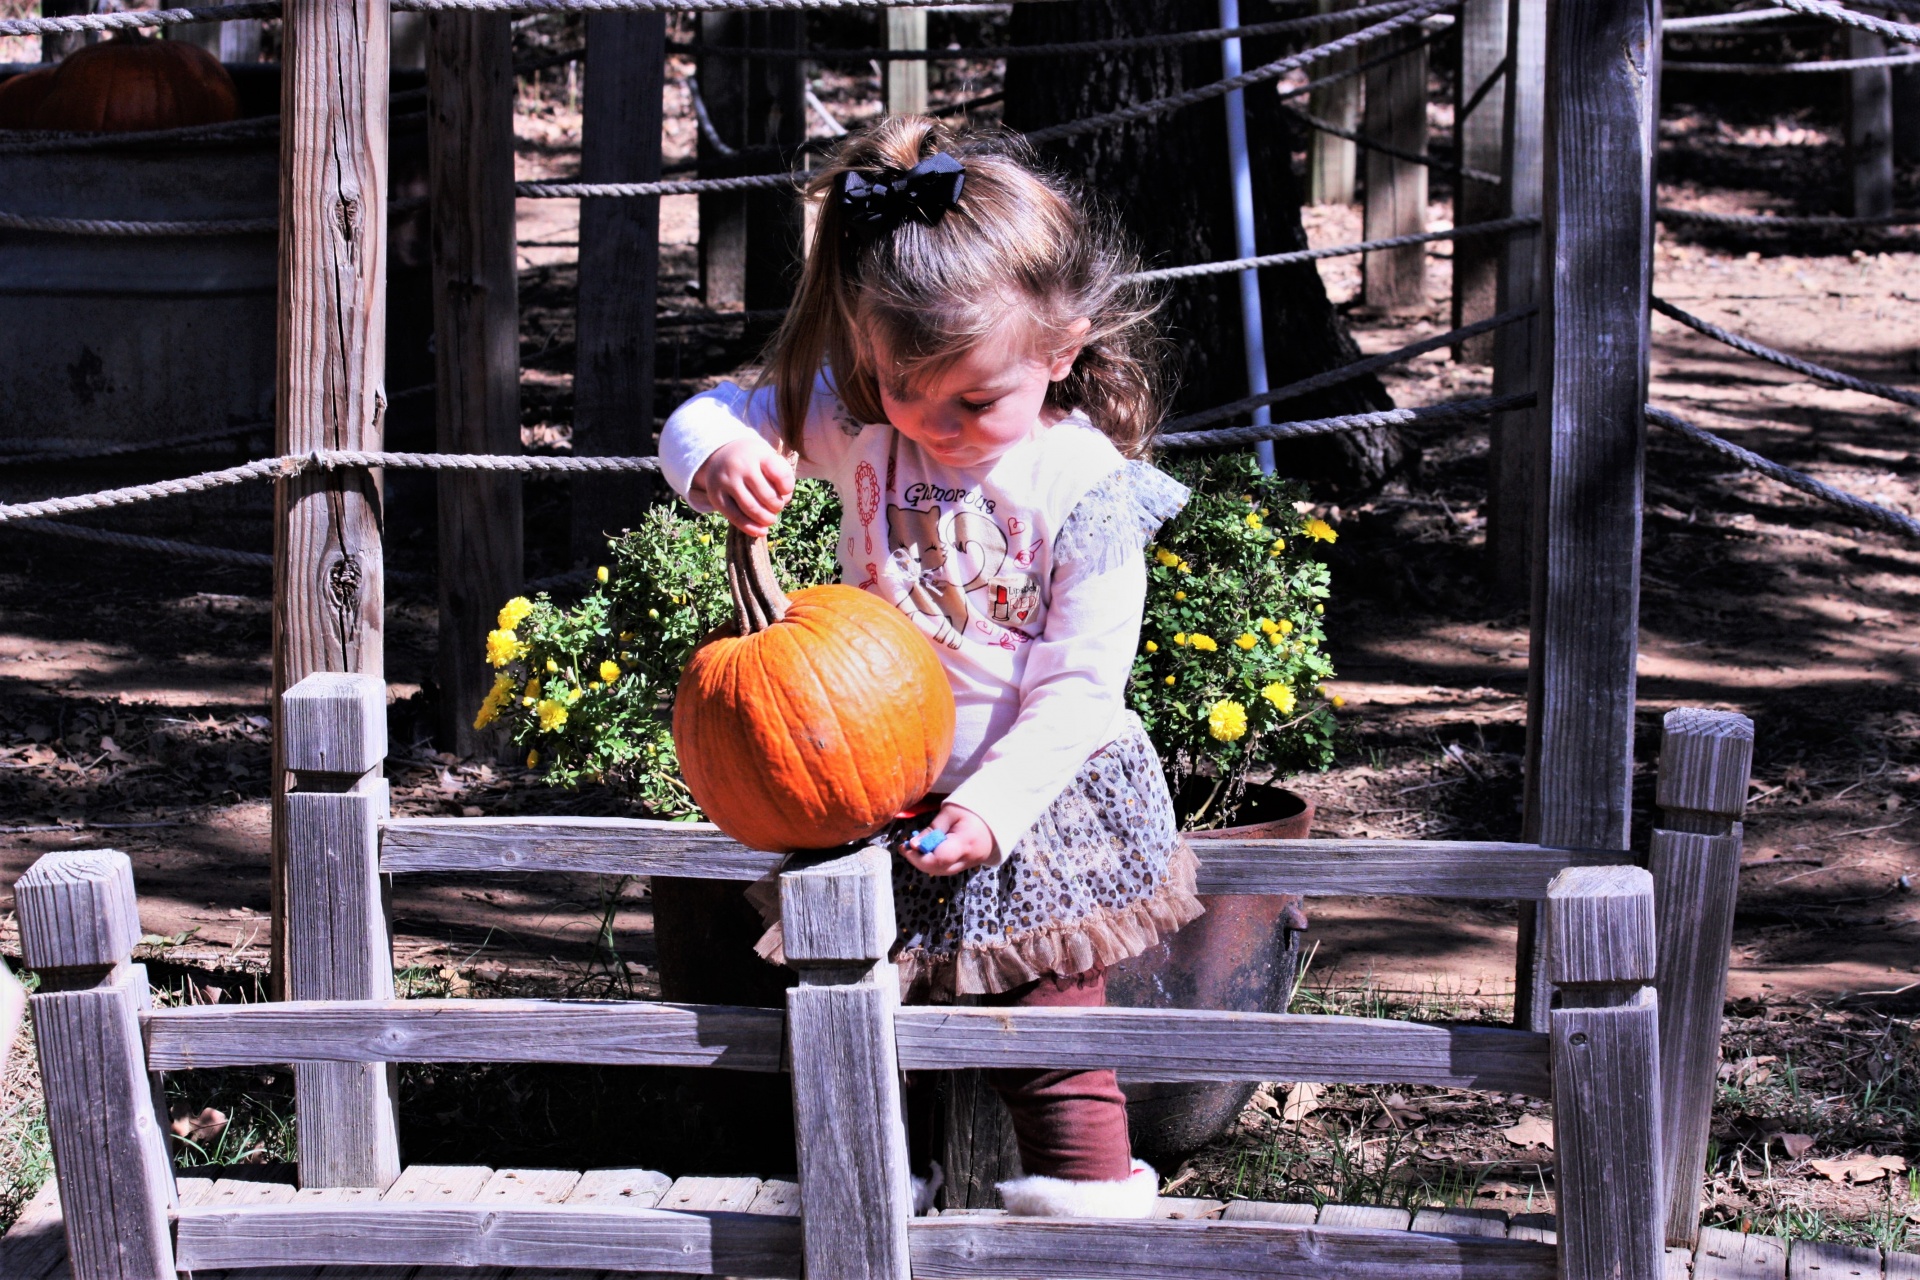 A cute little girl is holding a small orange pumpkin at a Pumpkin Patch, with yellow flowers in the background.